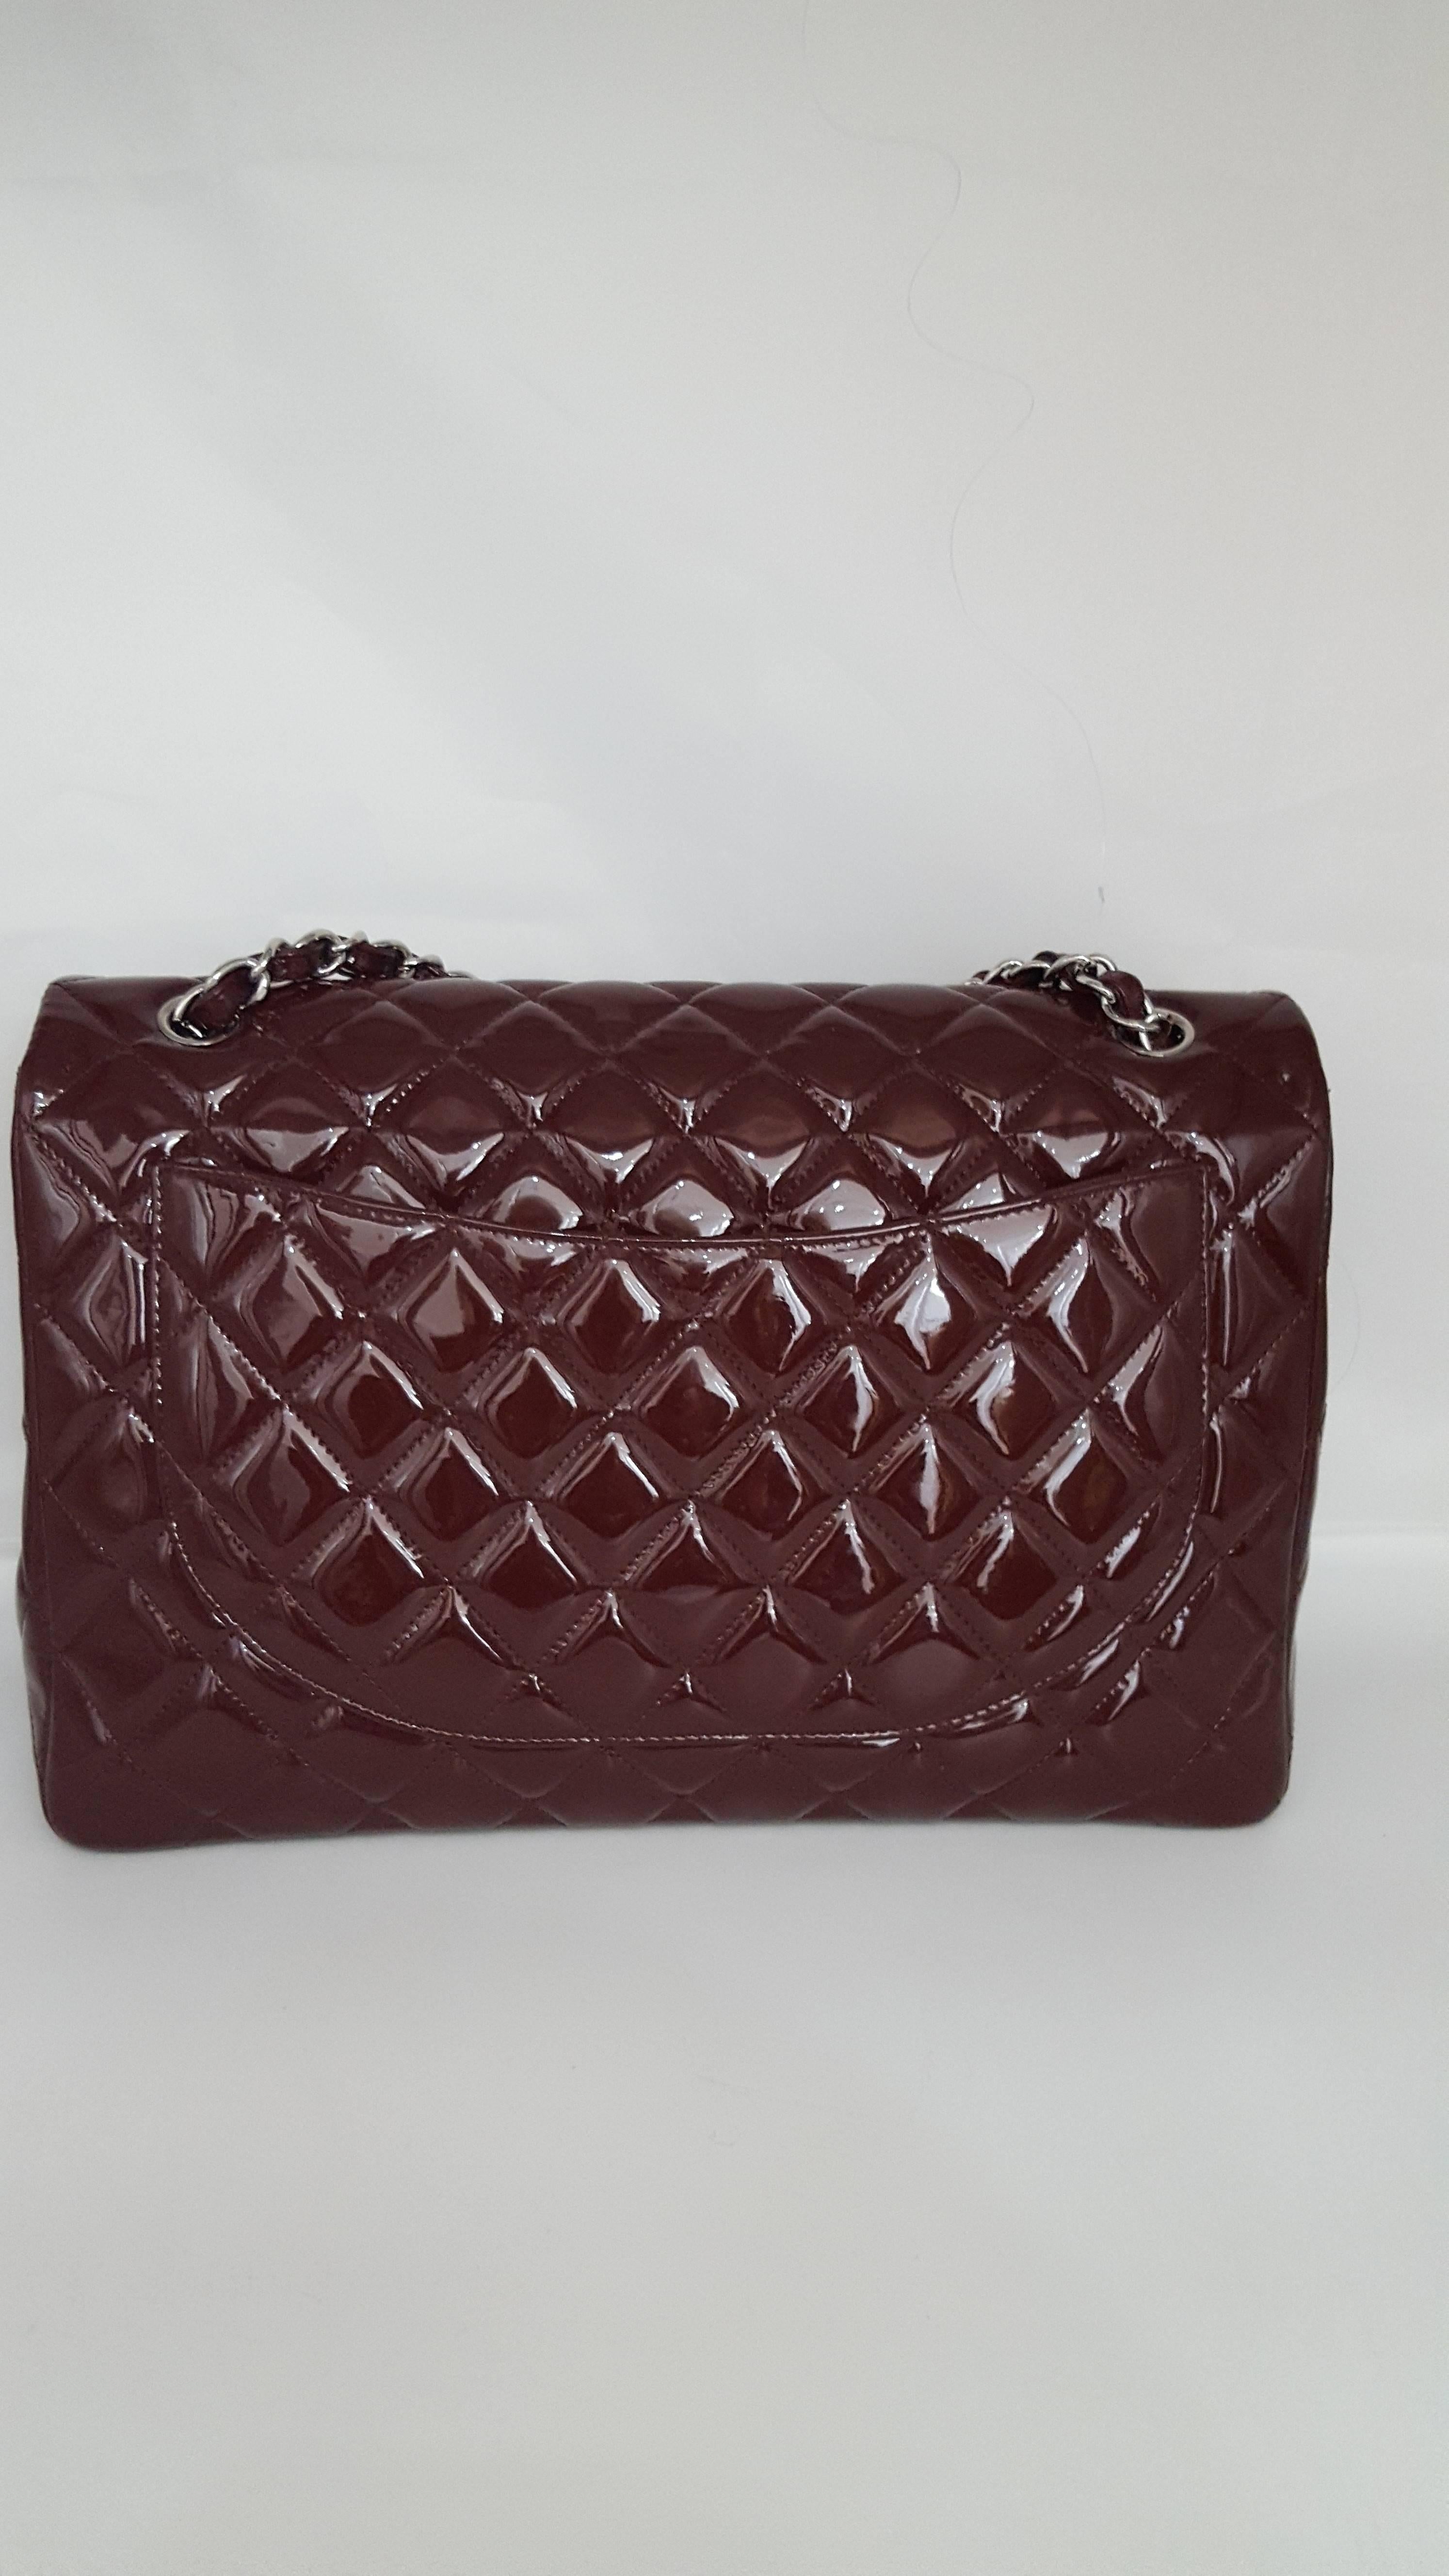 Offered for sale is this gorgeous Bordeaux Chanel XL Jumbo in patent.  This handbag is a single flap and has silver hardware.  It was manufactured in Italy in 2011 and is excellent condition.  The interior is a Bordeaux cloth with one large zipper